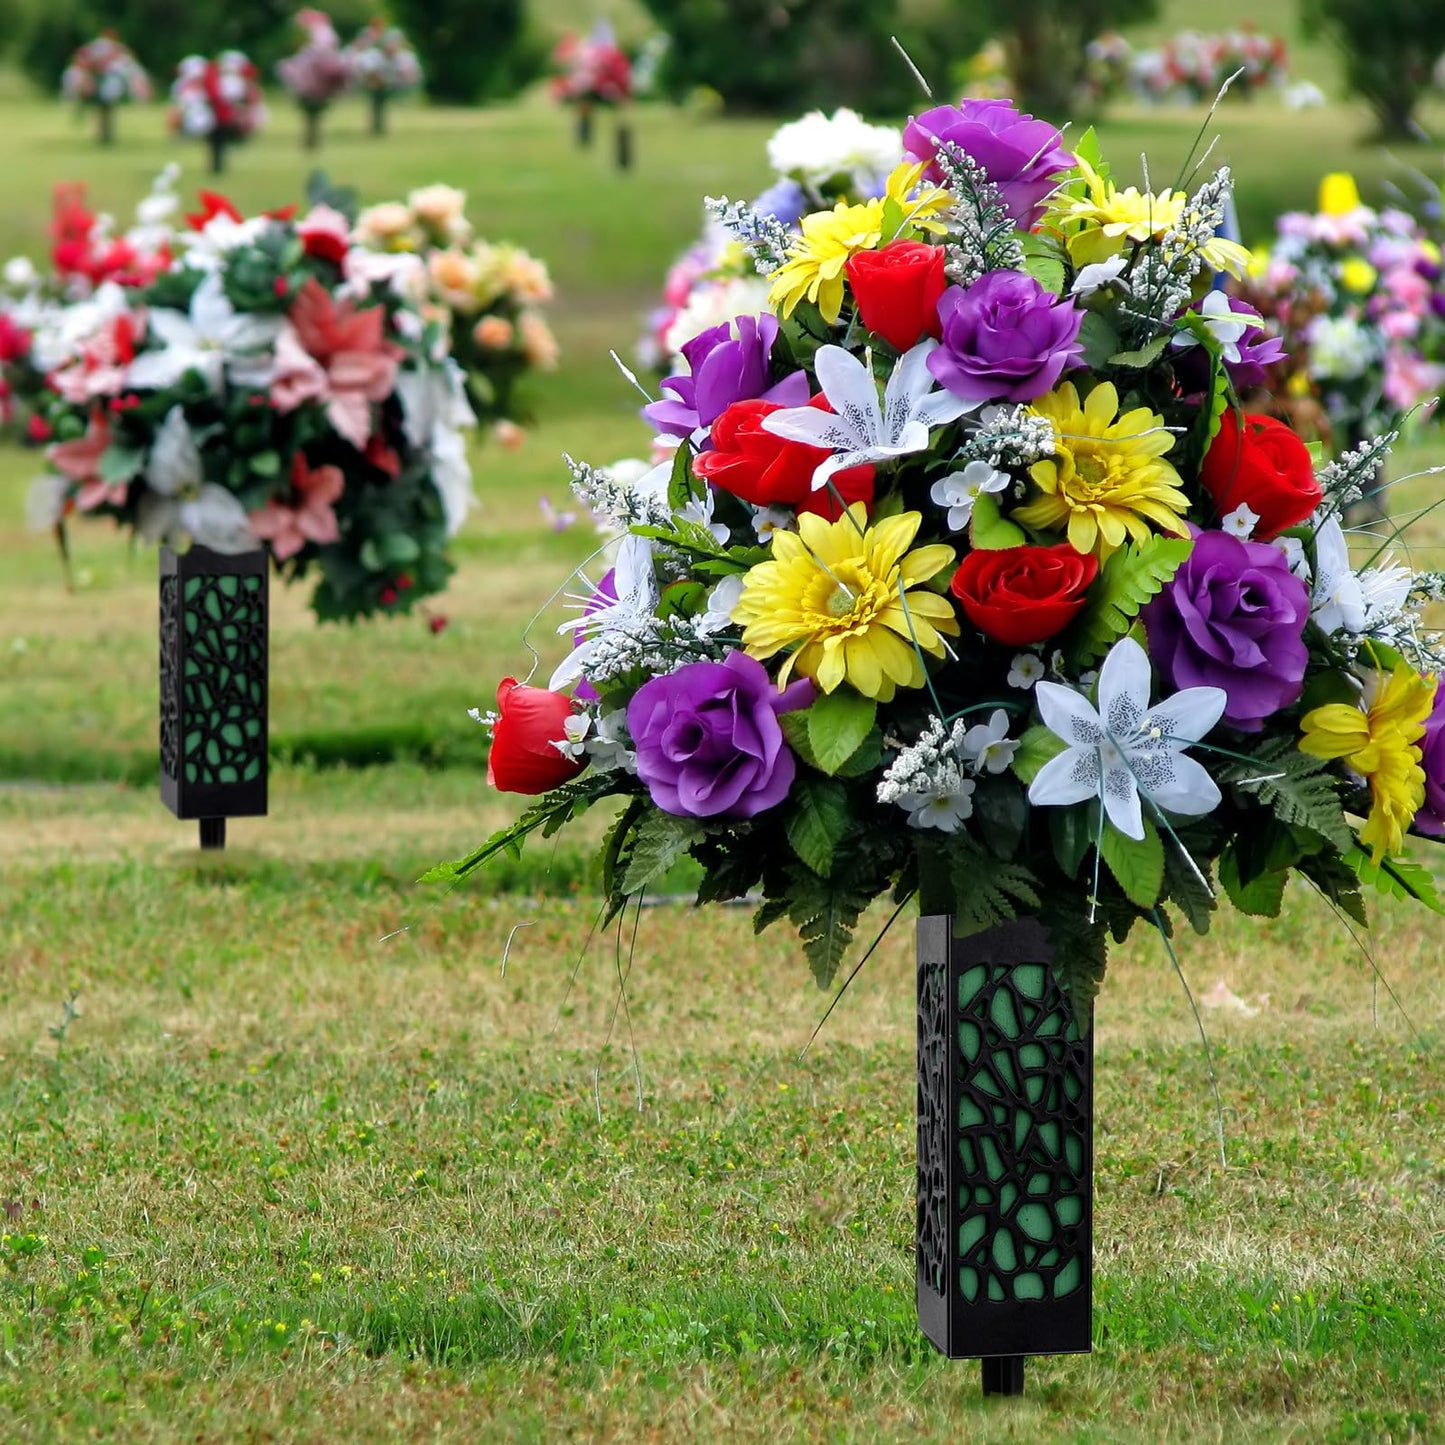 Hahood 8 Packs Cemetery Vases with Spikes and Foam Plastic Grave Vase Outdoor In Ground Cemetery Grave Flower Holders Memorial Gravestone Headstone Flower Vase for Cemetery Grave Decoration